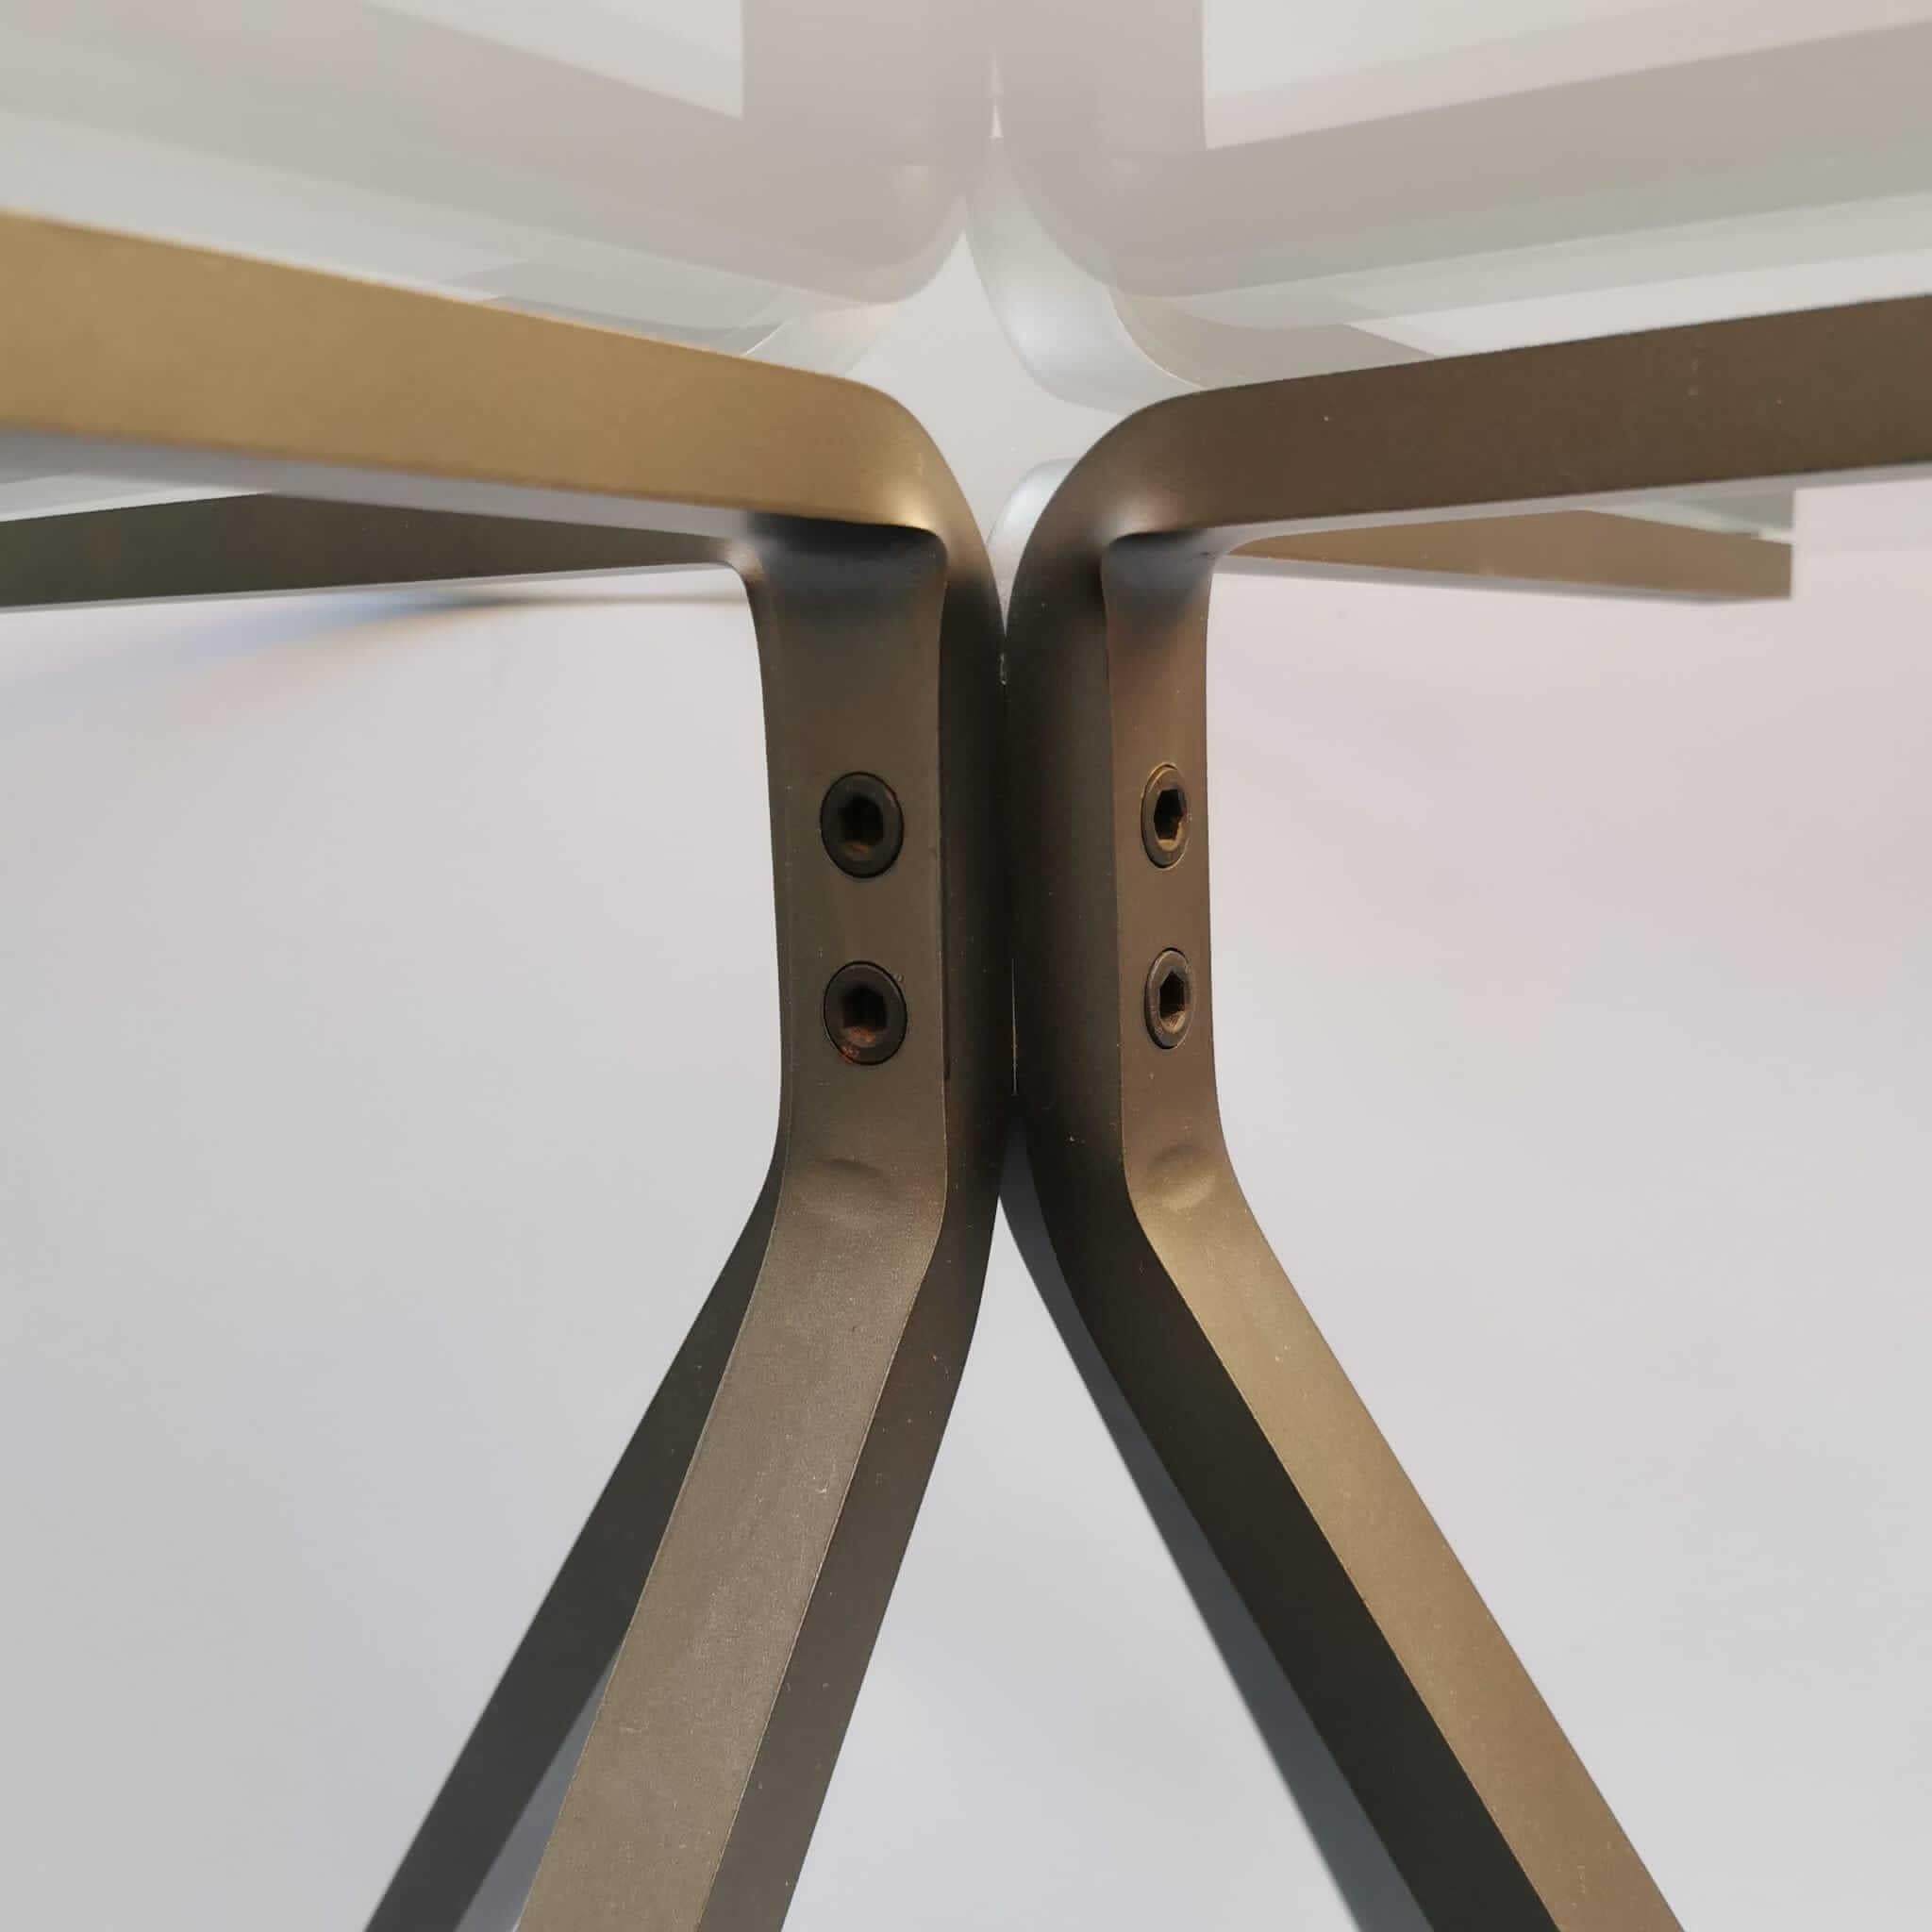 With his usual lucidity Enzo Mari decides to proceed, in this collection of tables, with transparent crystal tops. Only in this way will it be possible to enhance the rough essentiality of the metal profile supports. Designed in 1973,